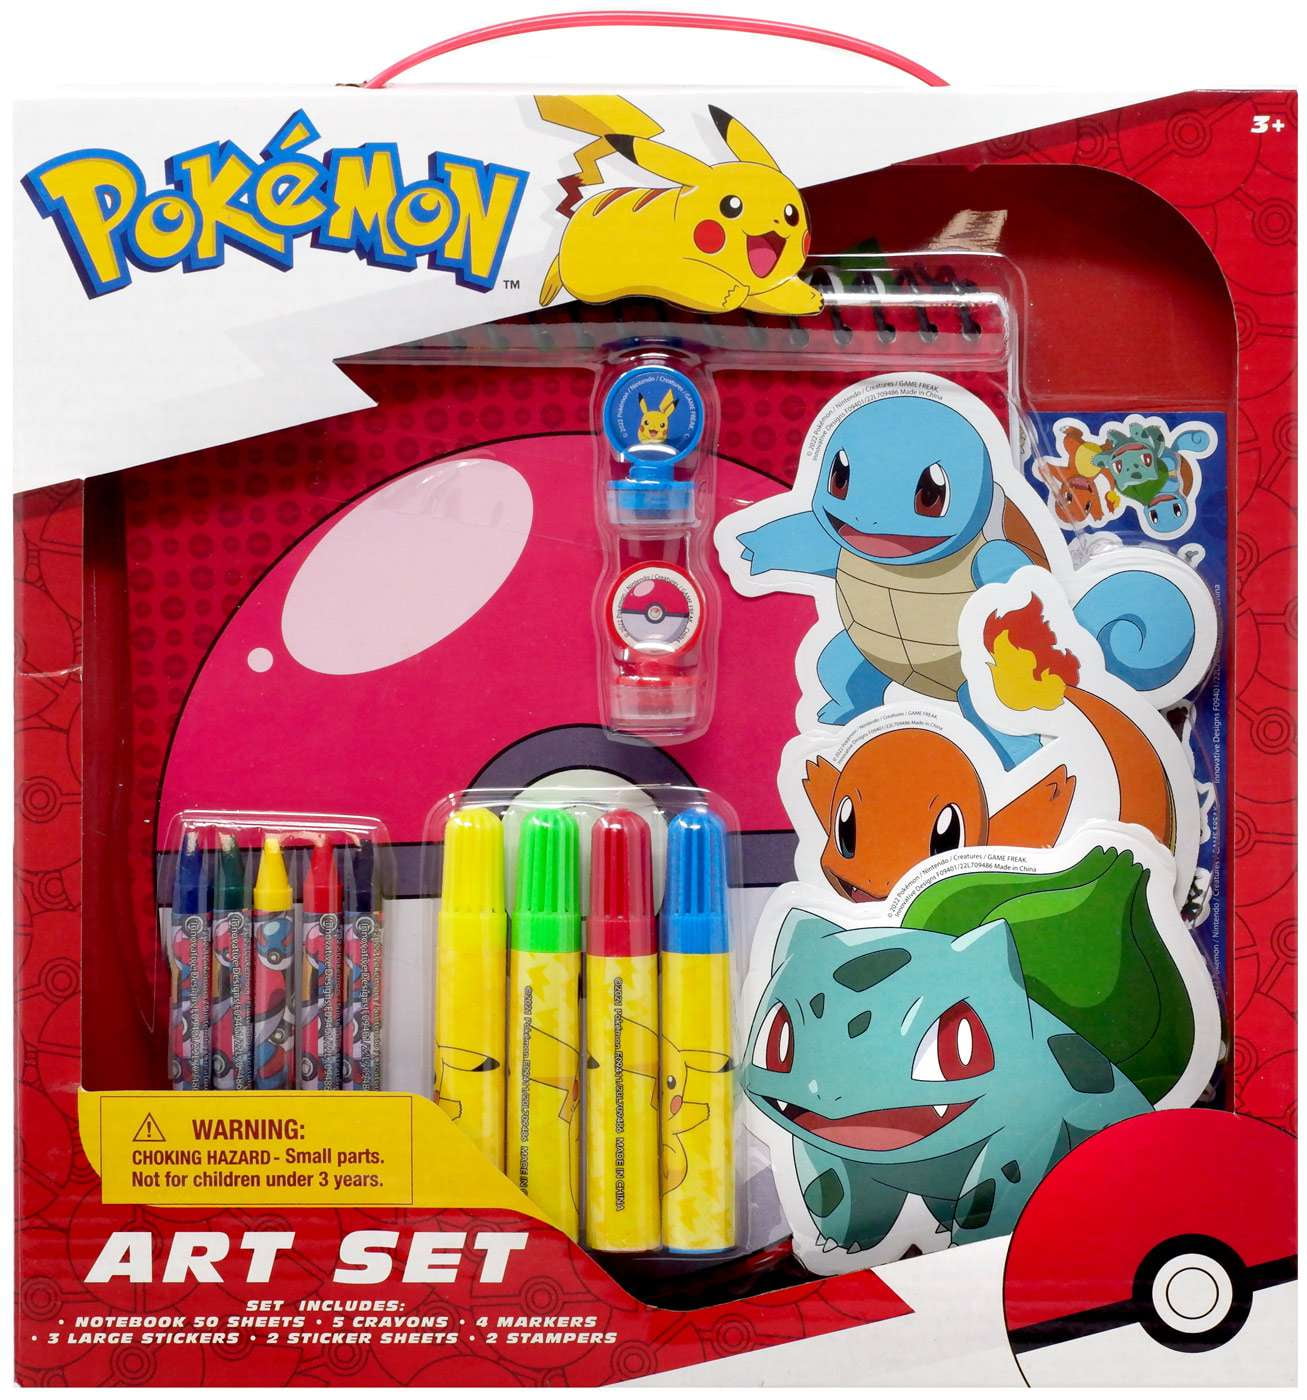 Pokemon School Supplies and Clothes